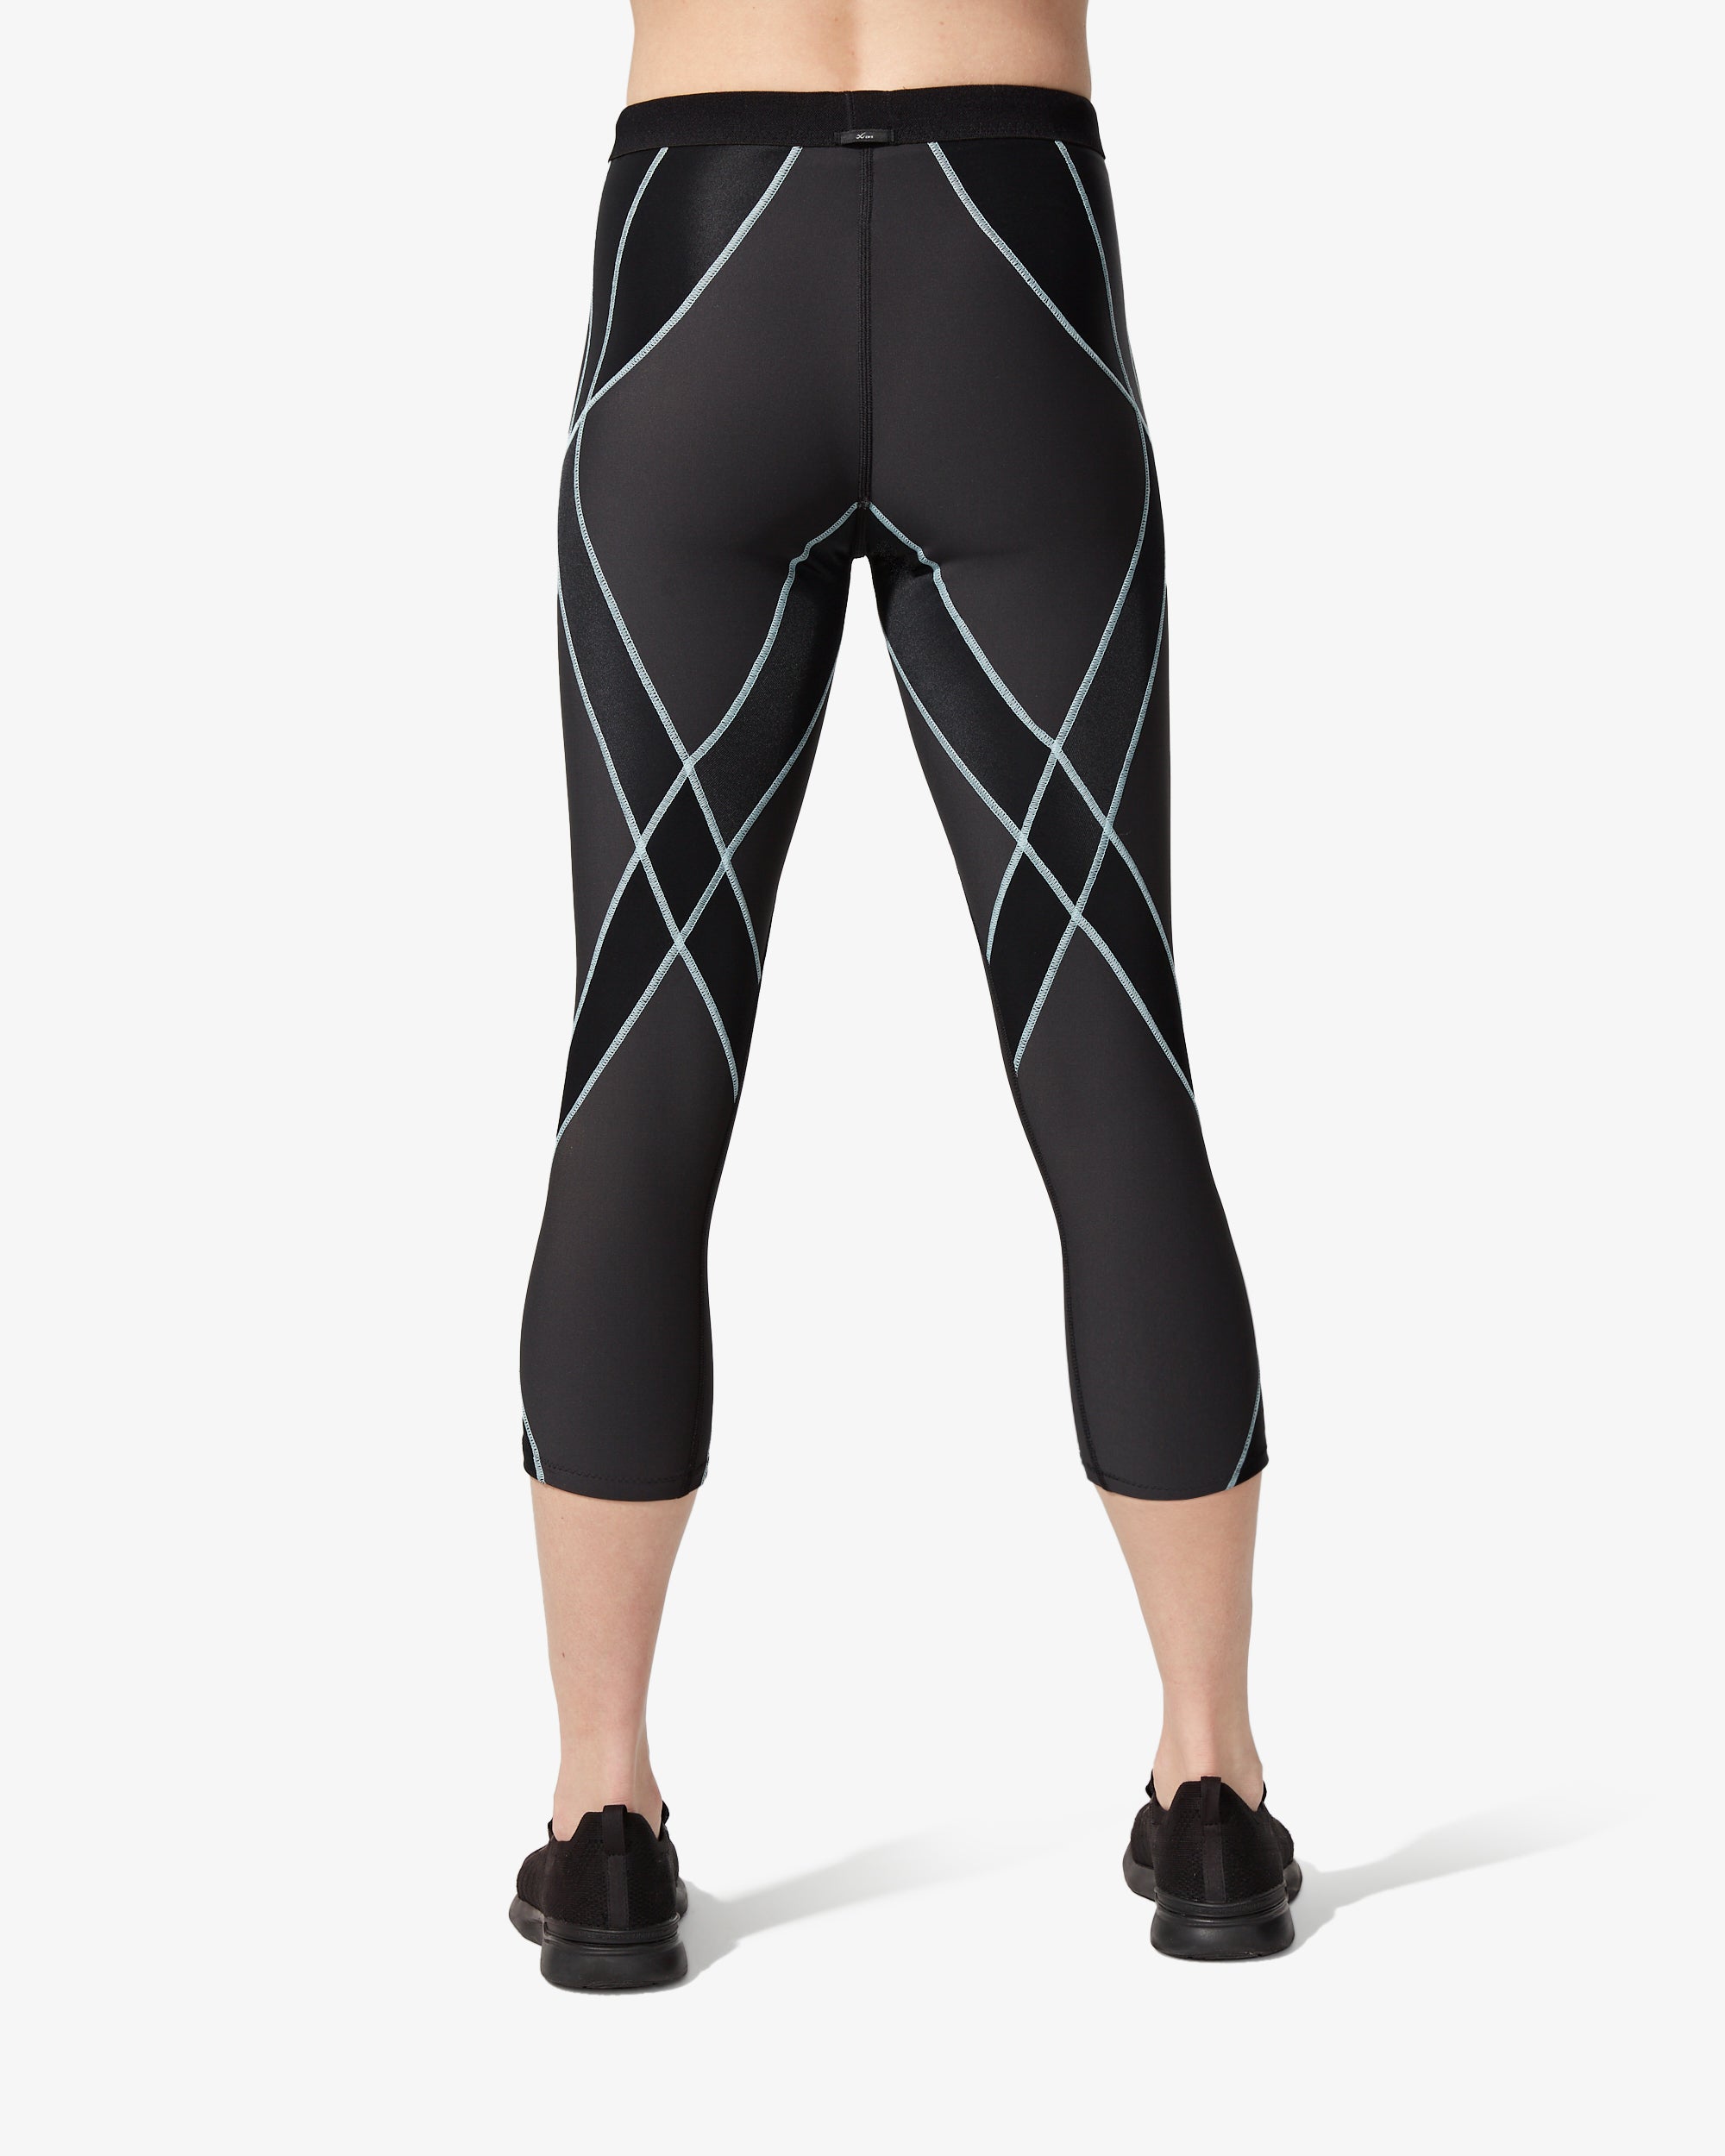 CW-X Endurance Generator Joint & Muscle Support Compression Tights Women's  2XL